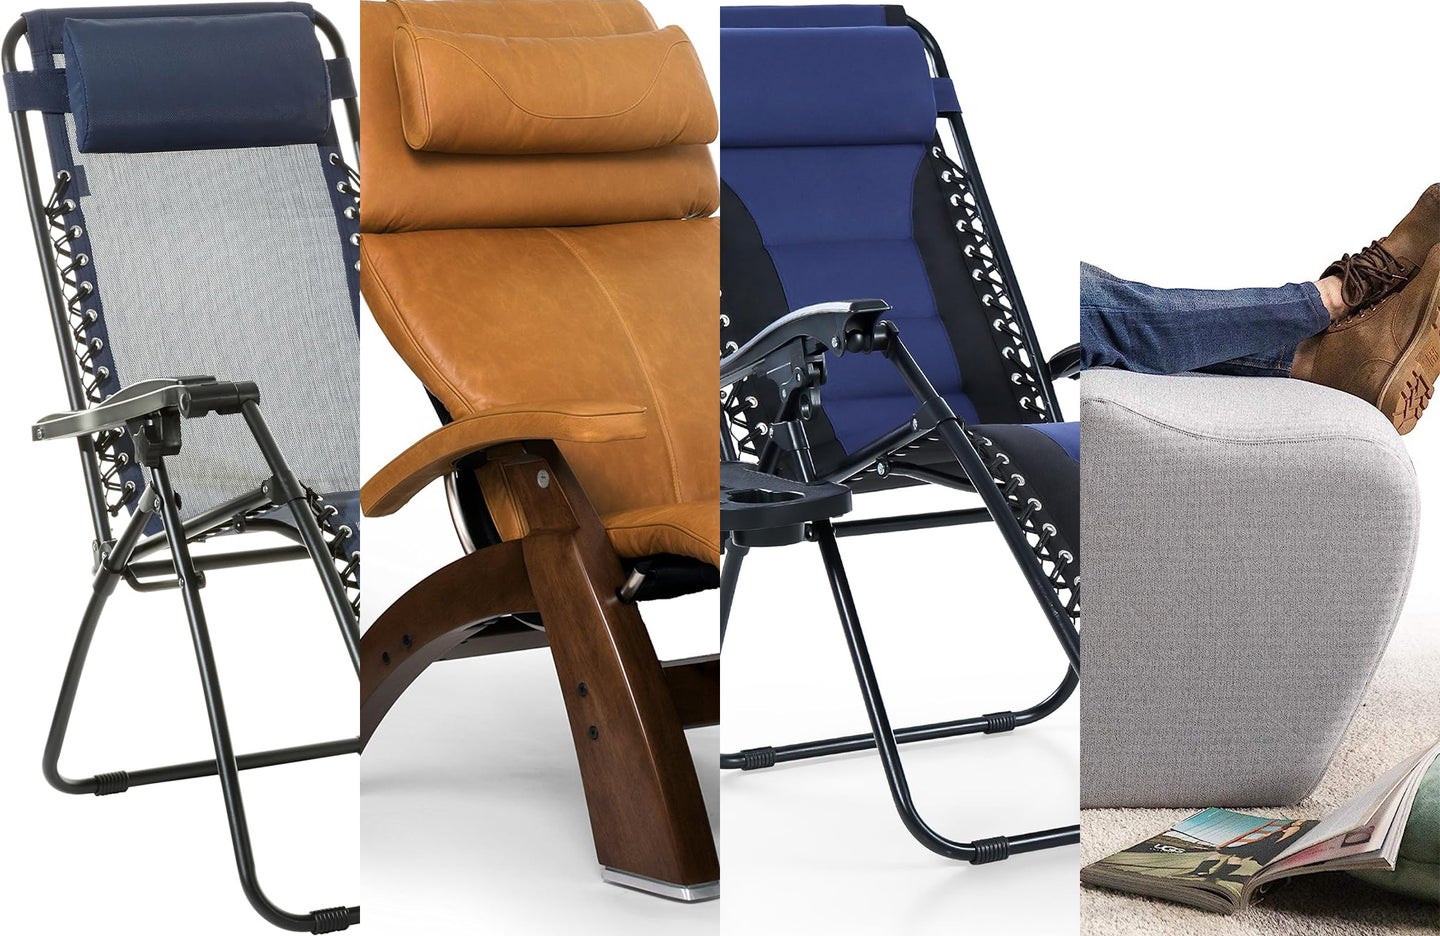 Four examples of the best zero gravity chairs shown next to each other